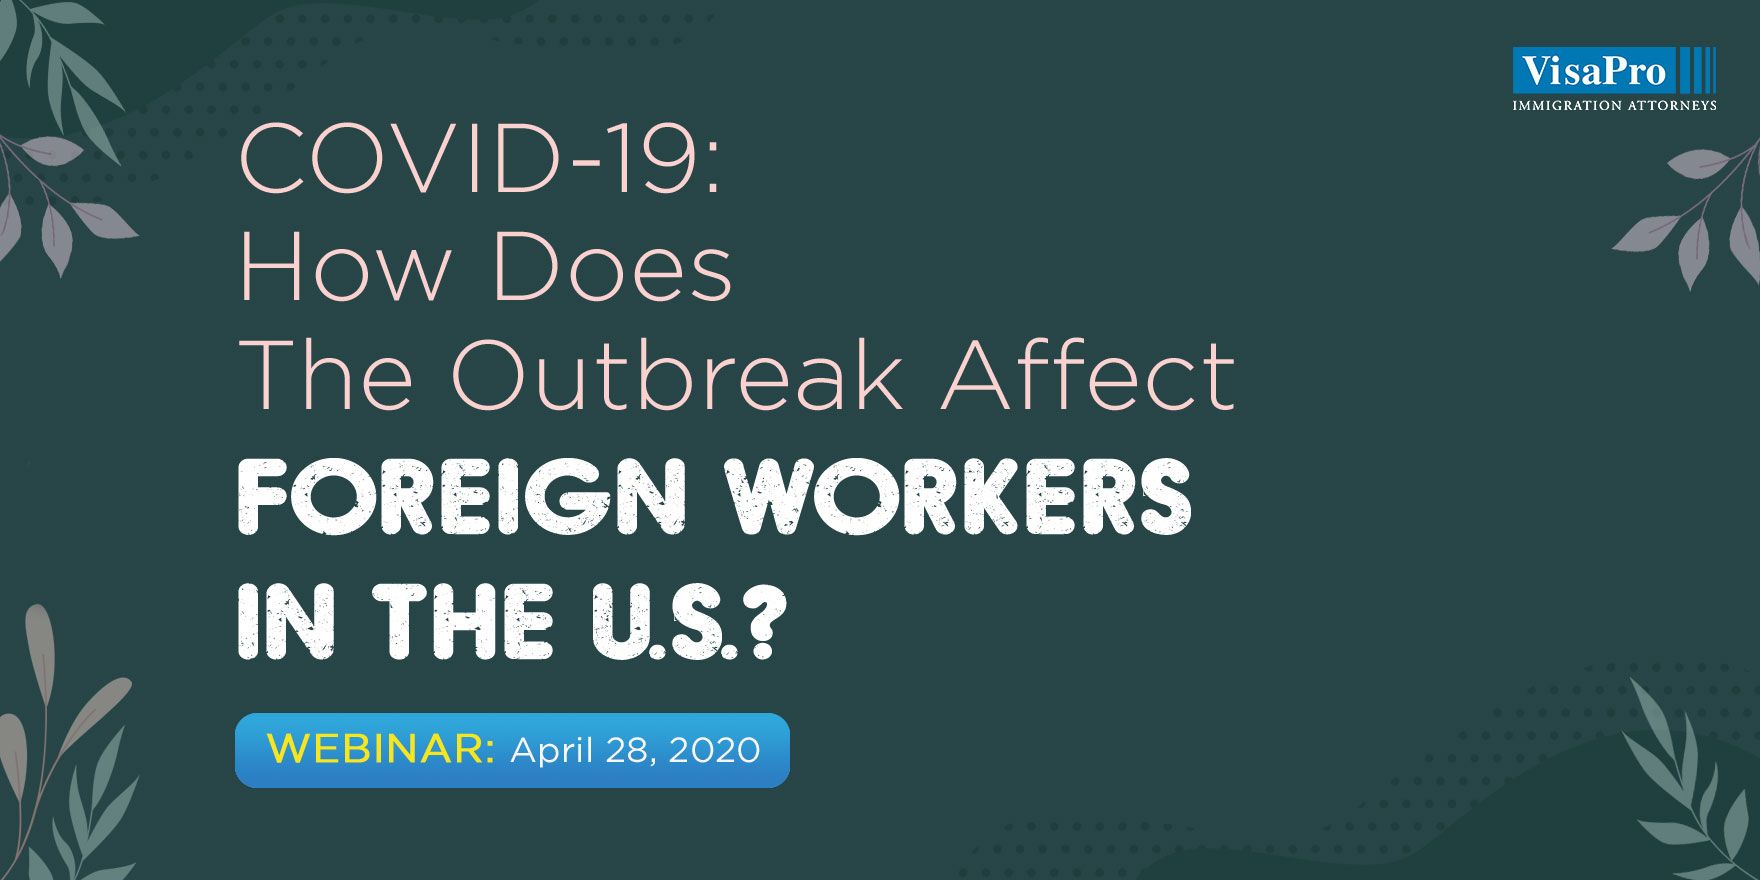 COVID-19: How Does The Outbreak Affect Foreign Workers In The U.S.?, Buenes Alres, Buenos Aires, Argentina